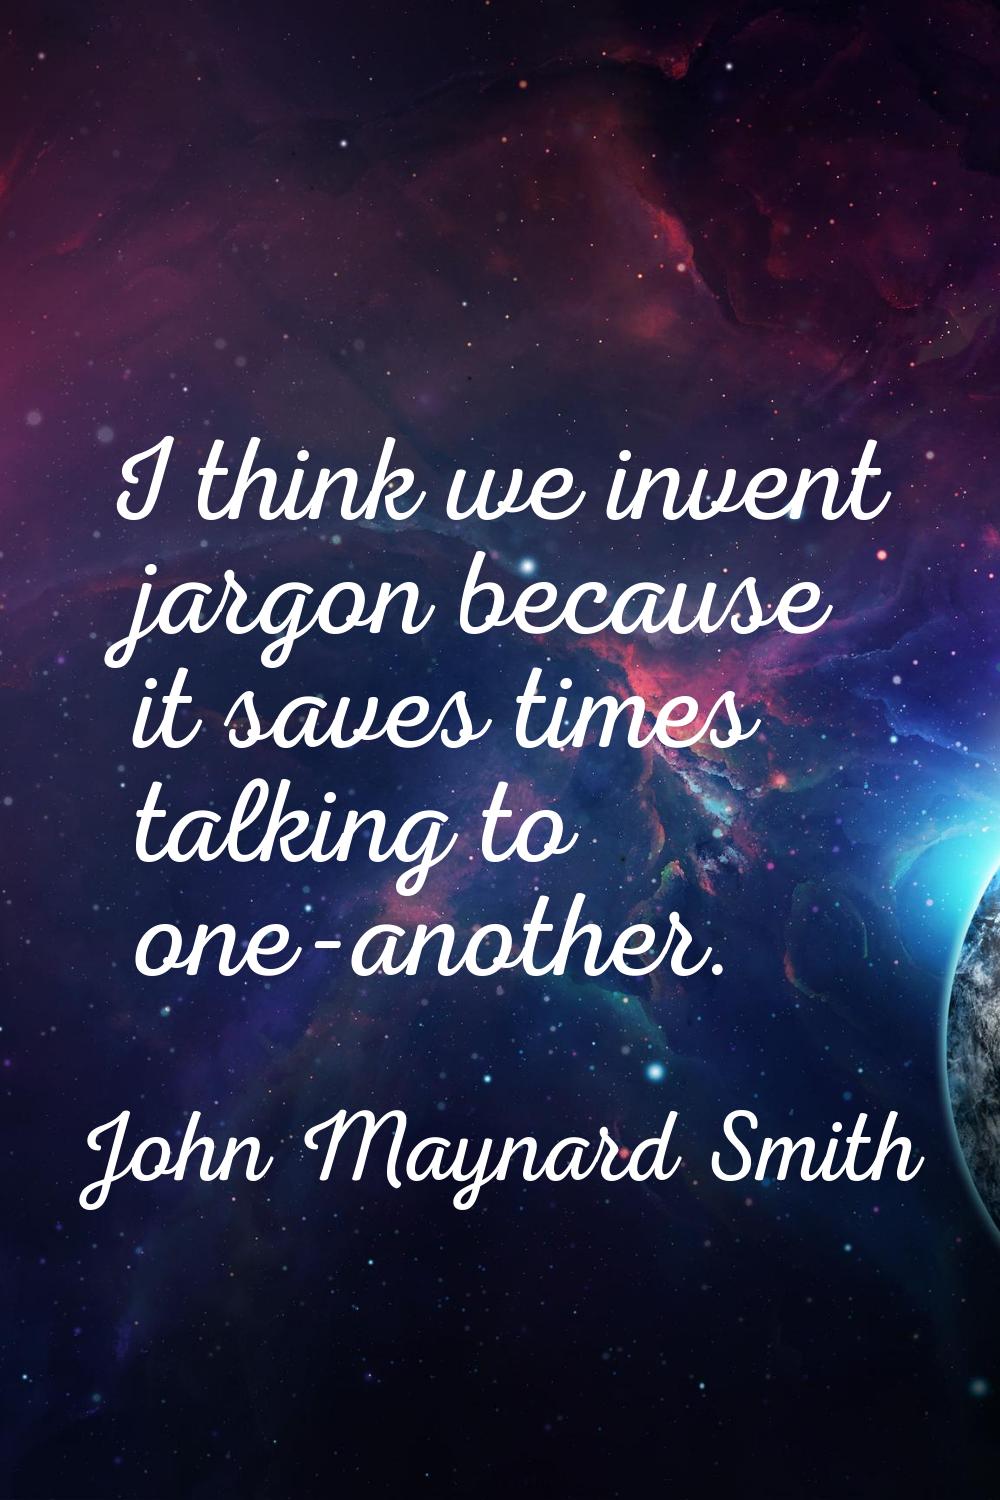 I think we invent jargon because it saves times talking to one-another.